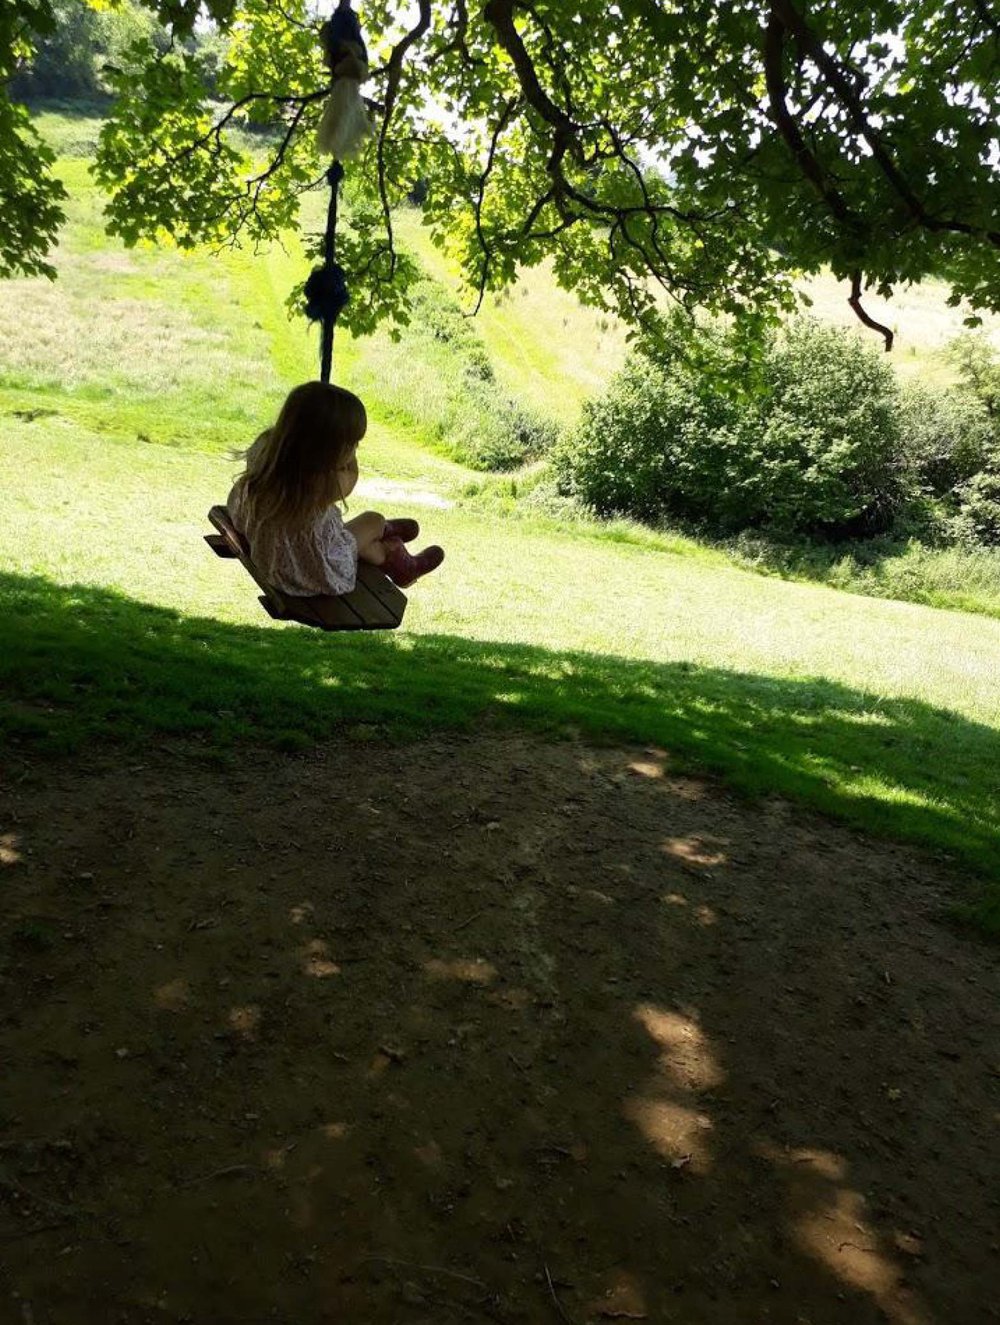 A girl is on a swing hanging from a tree branch